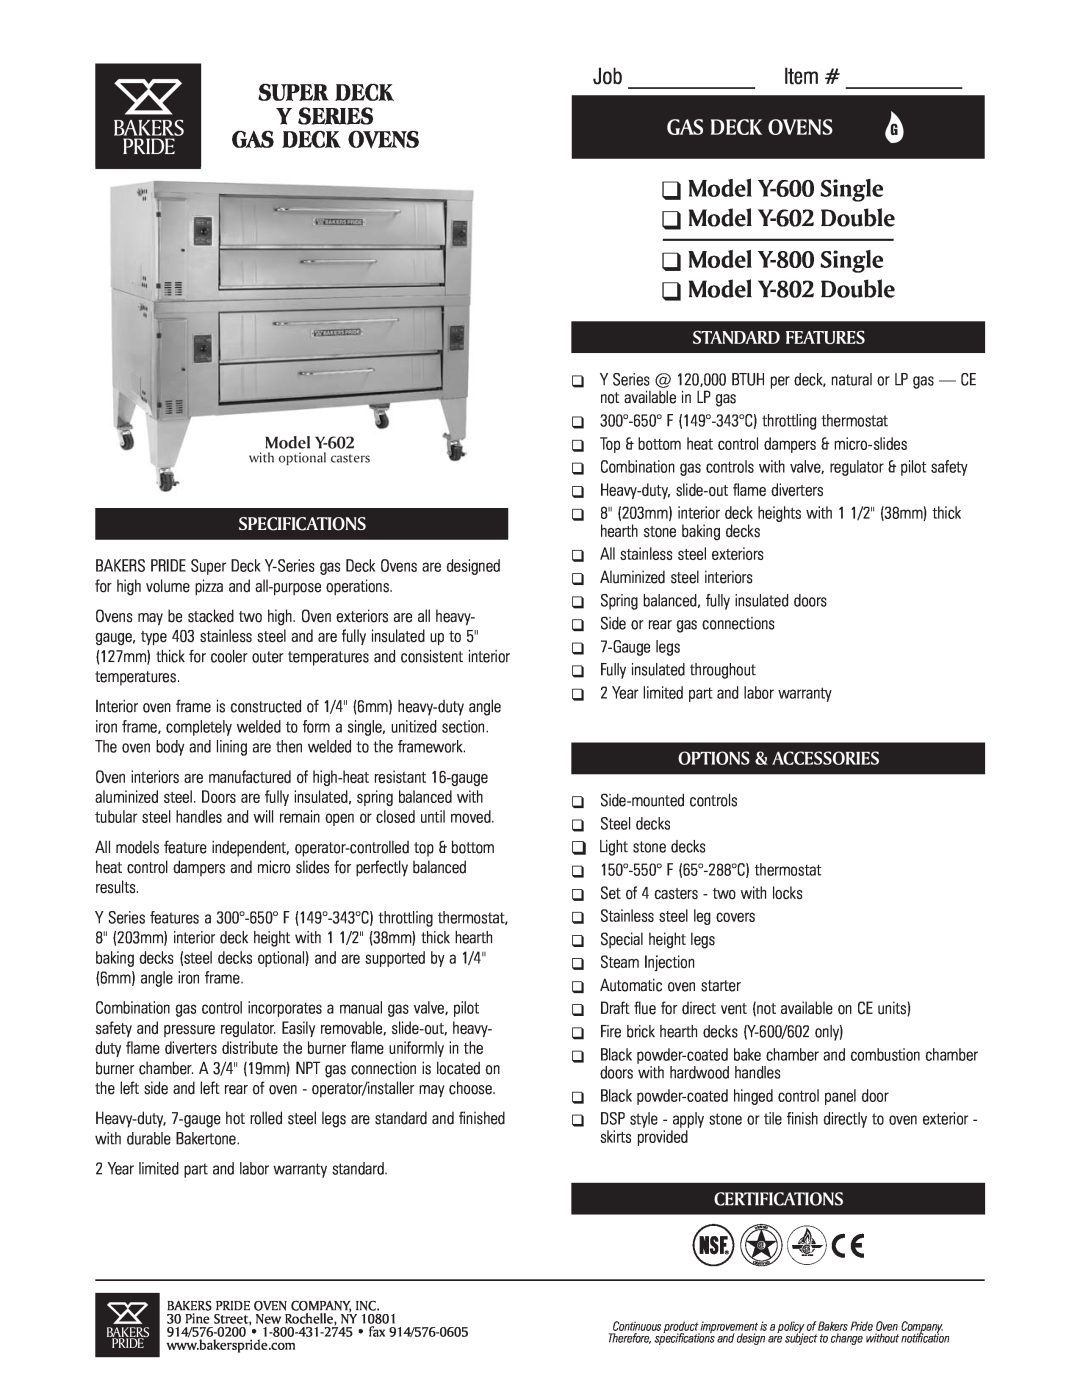 Bakers Pride Oven specifications Model Y-600 Single Model Y-602 Double Model Y-800 Single, Model Y-802 Double 